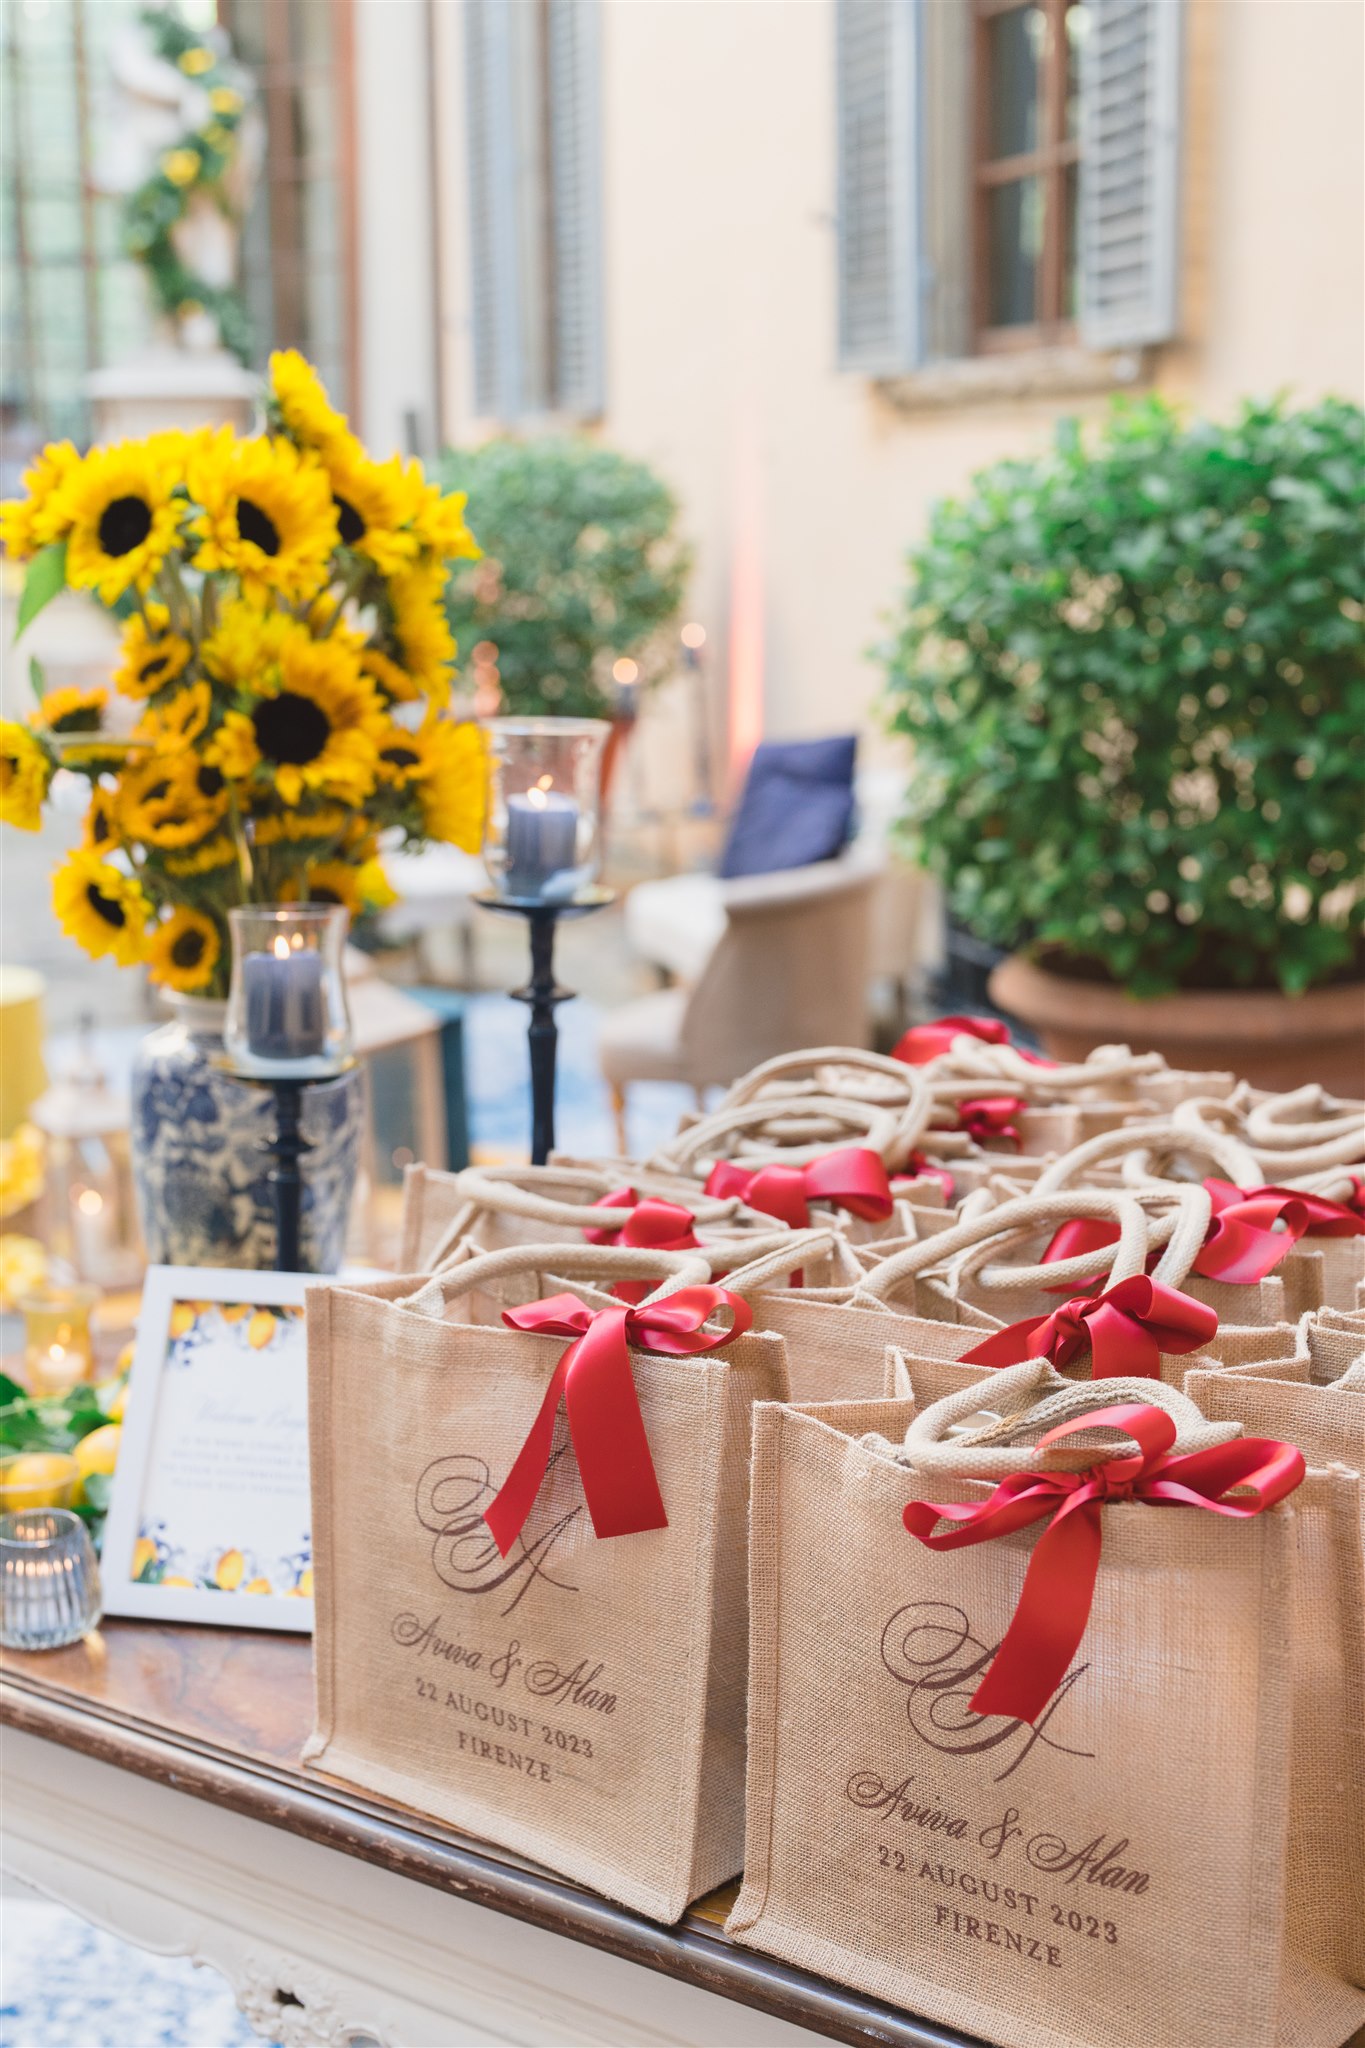 Wedding welcome bags for a luxury destination wedding in Italy - Elegante by Michelle J. Photographer credit David Bastianoni